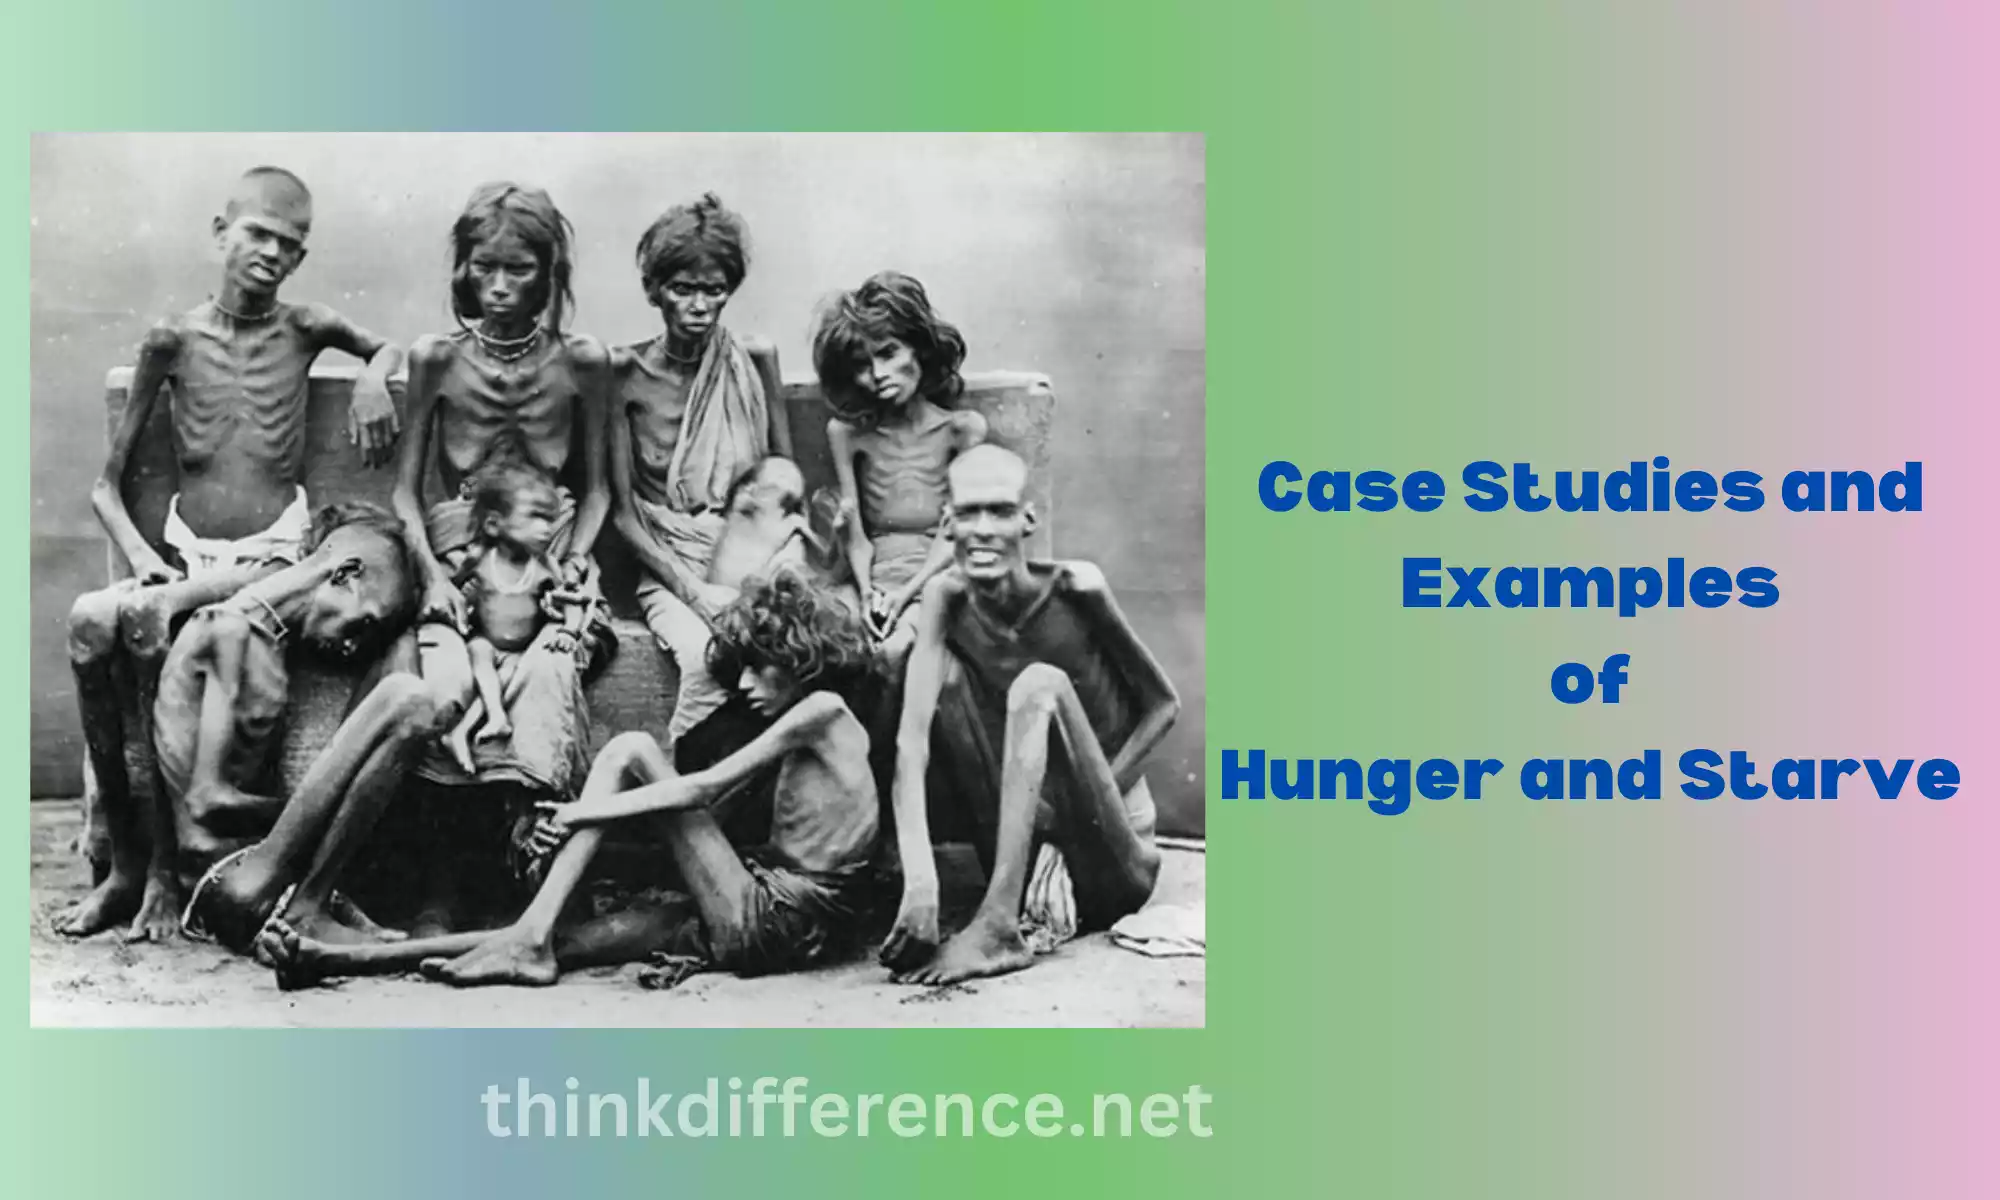 Case Studies and Examples of Hunger and Starve